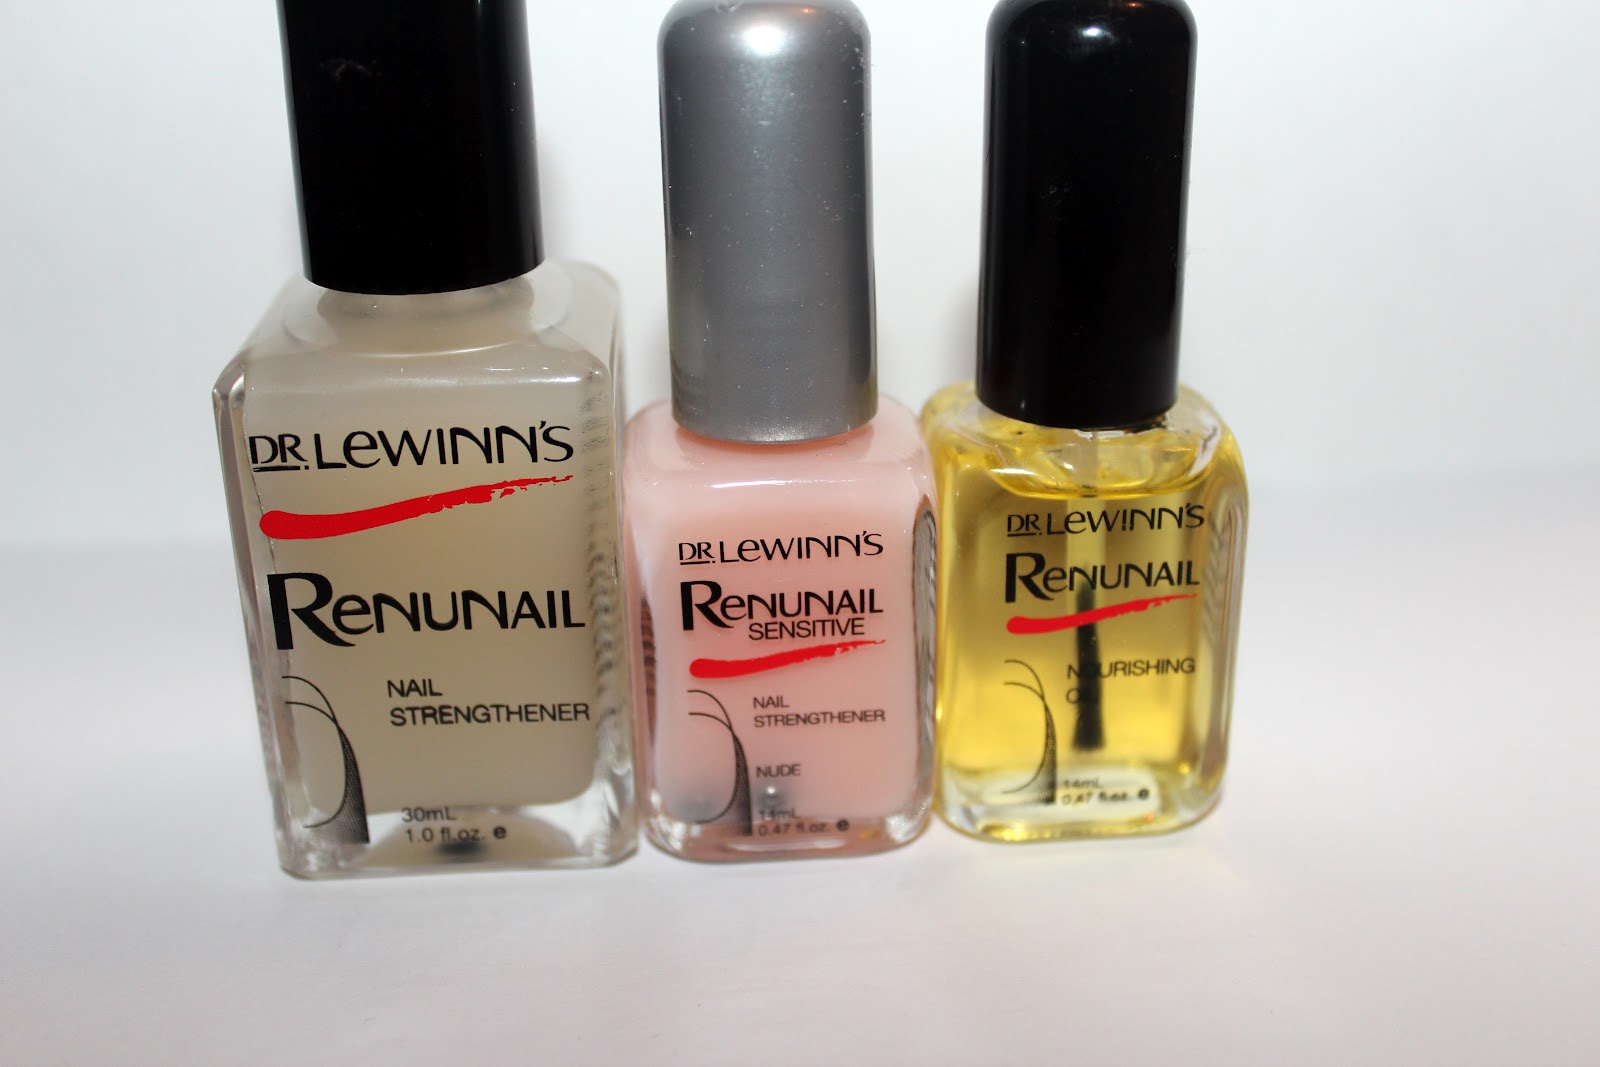 REVIEW: Dr Lewinn's Renunail Nail Strengthner | Obsessed By Beauty